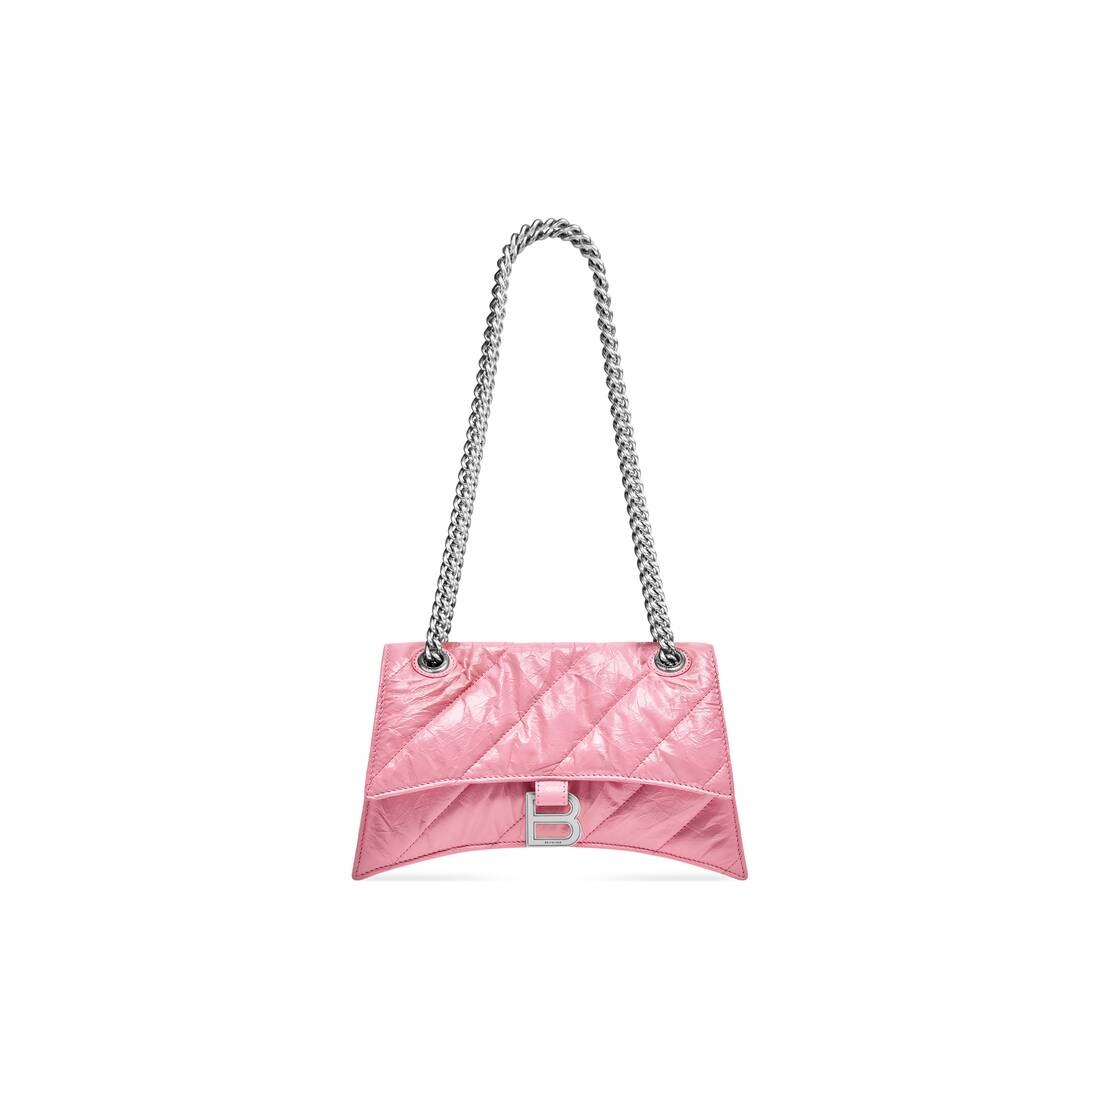 Balenciaga Crush Small Quilted Chain Shoulder Bag 5812 Sweet Pink